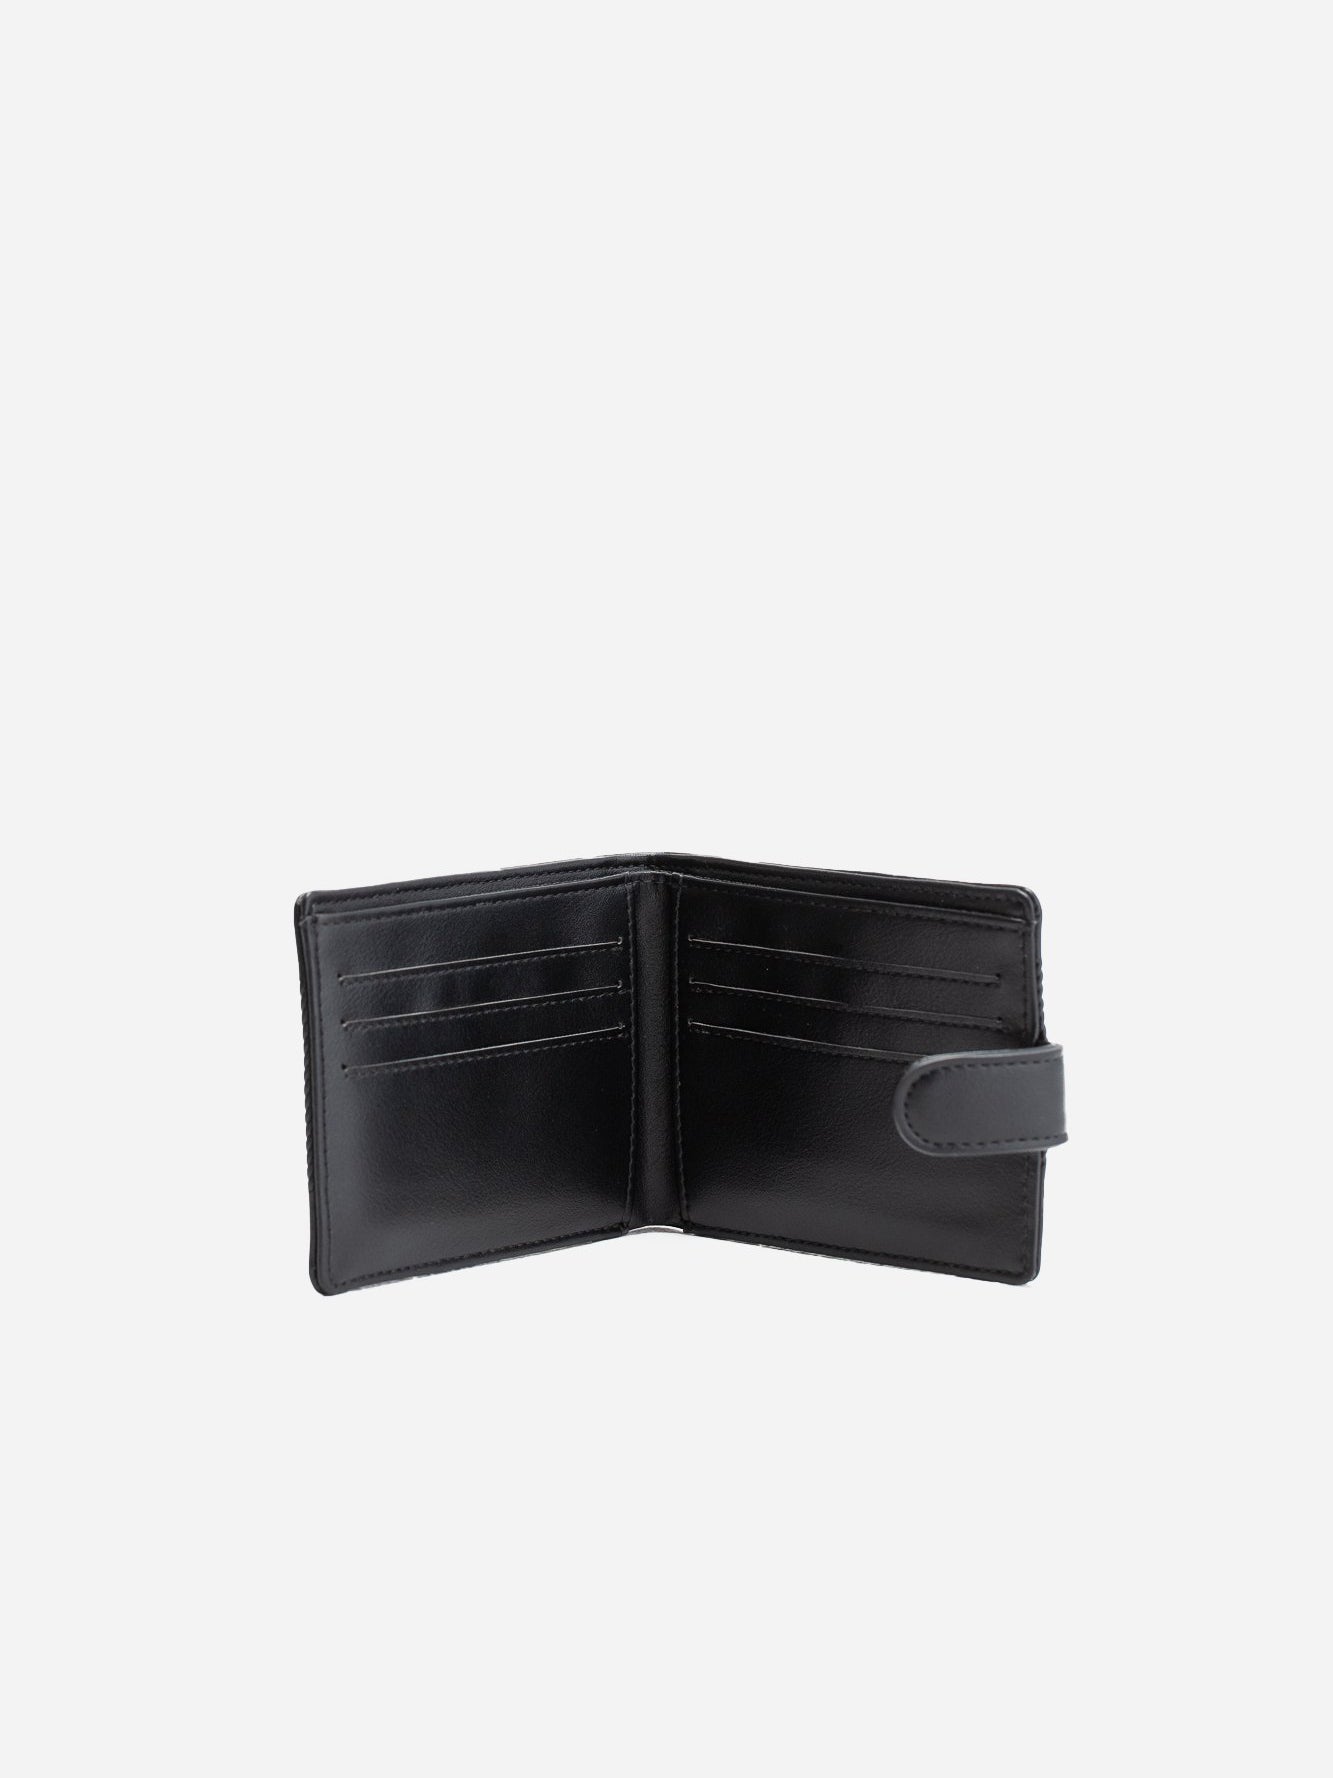 Daly Dress Mens Buttoned Wallet